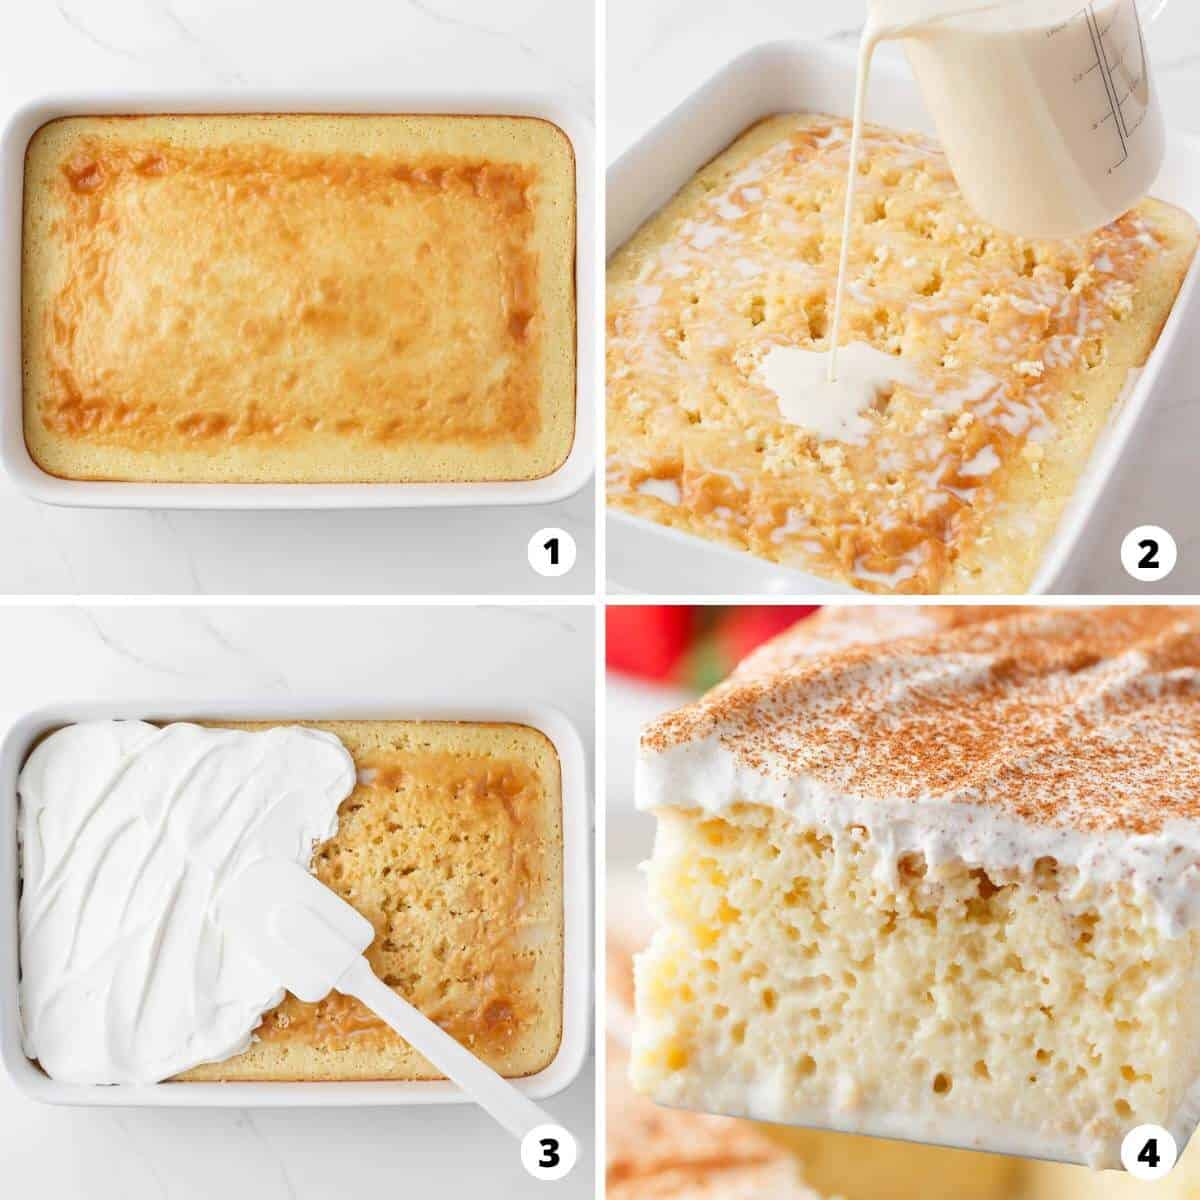 Showing how to make tres leches in a 6 step collage.